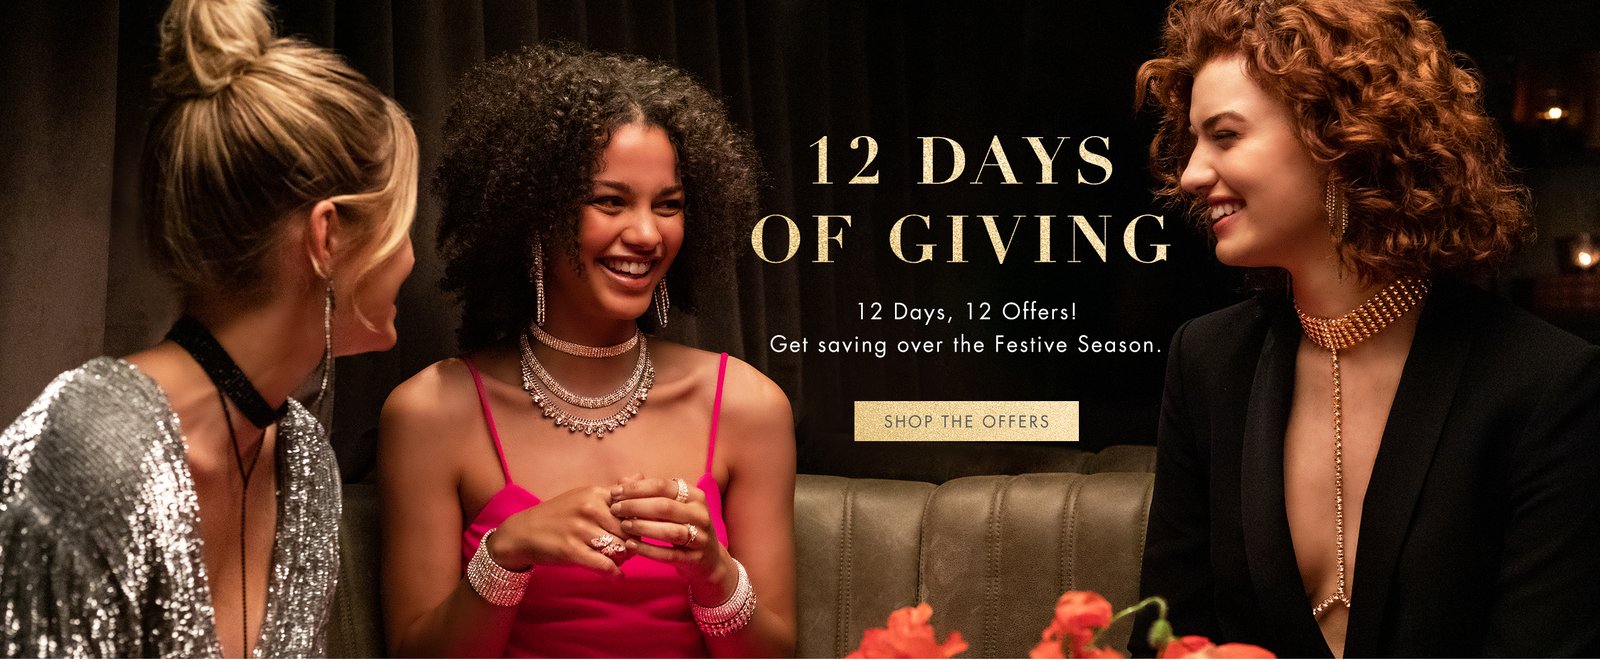 (Updated)12 Days of Christmas giving 20% OFF when you spend $50 at Lovisa